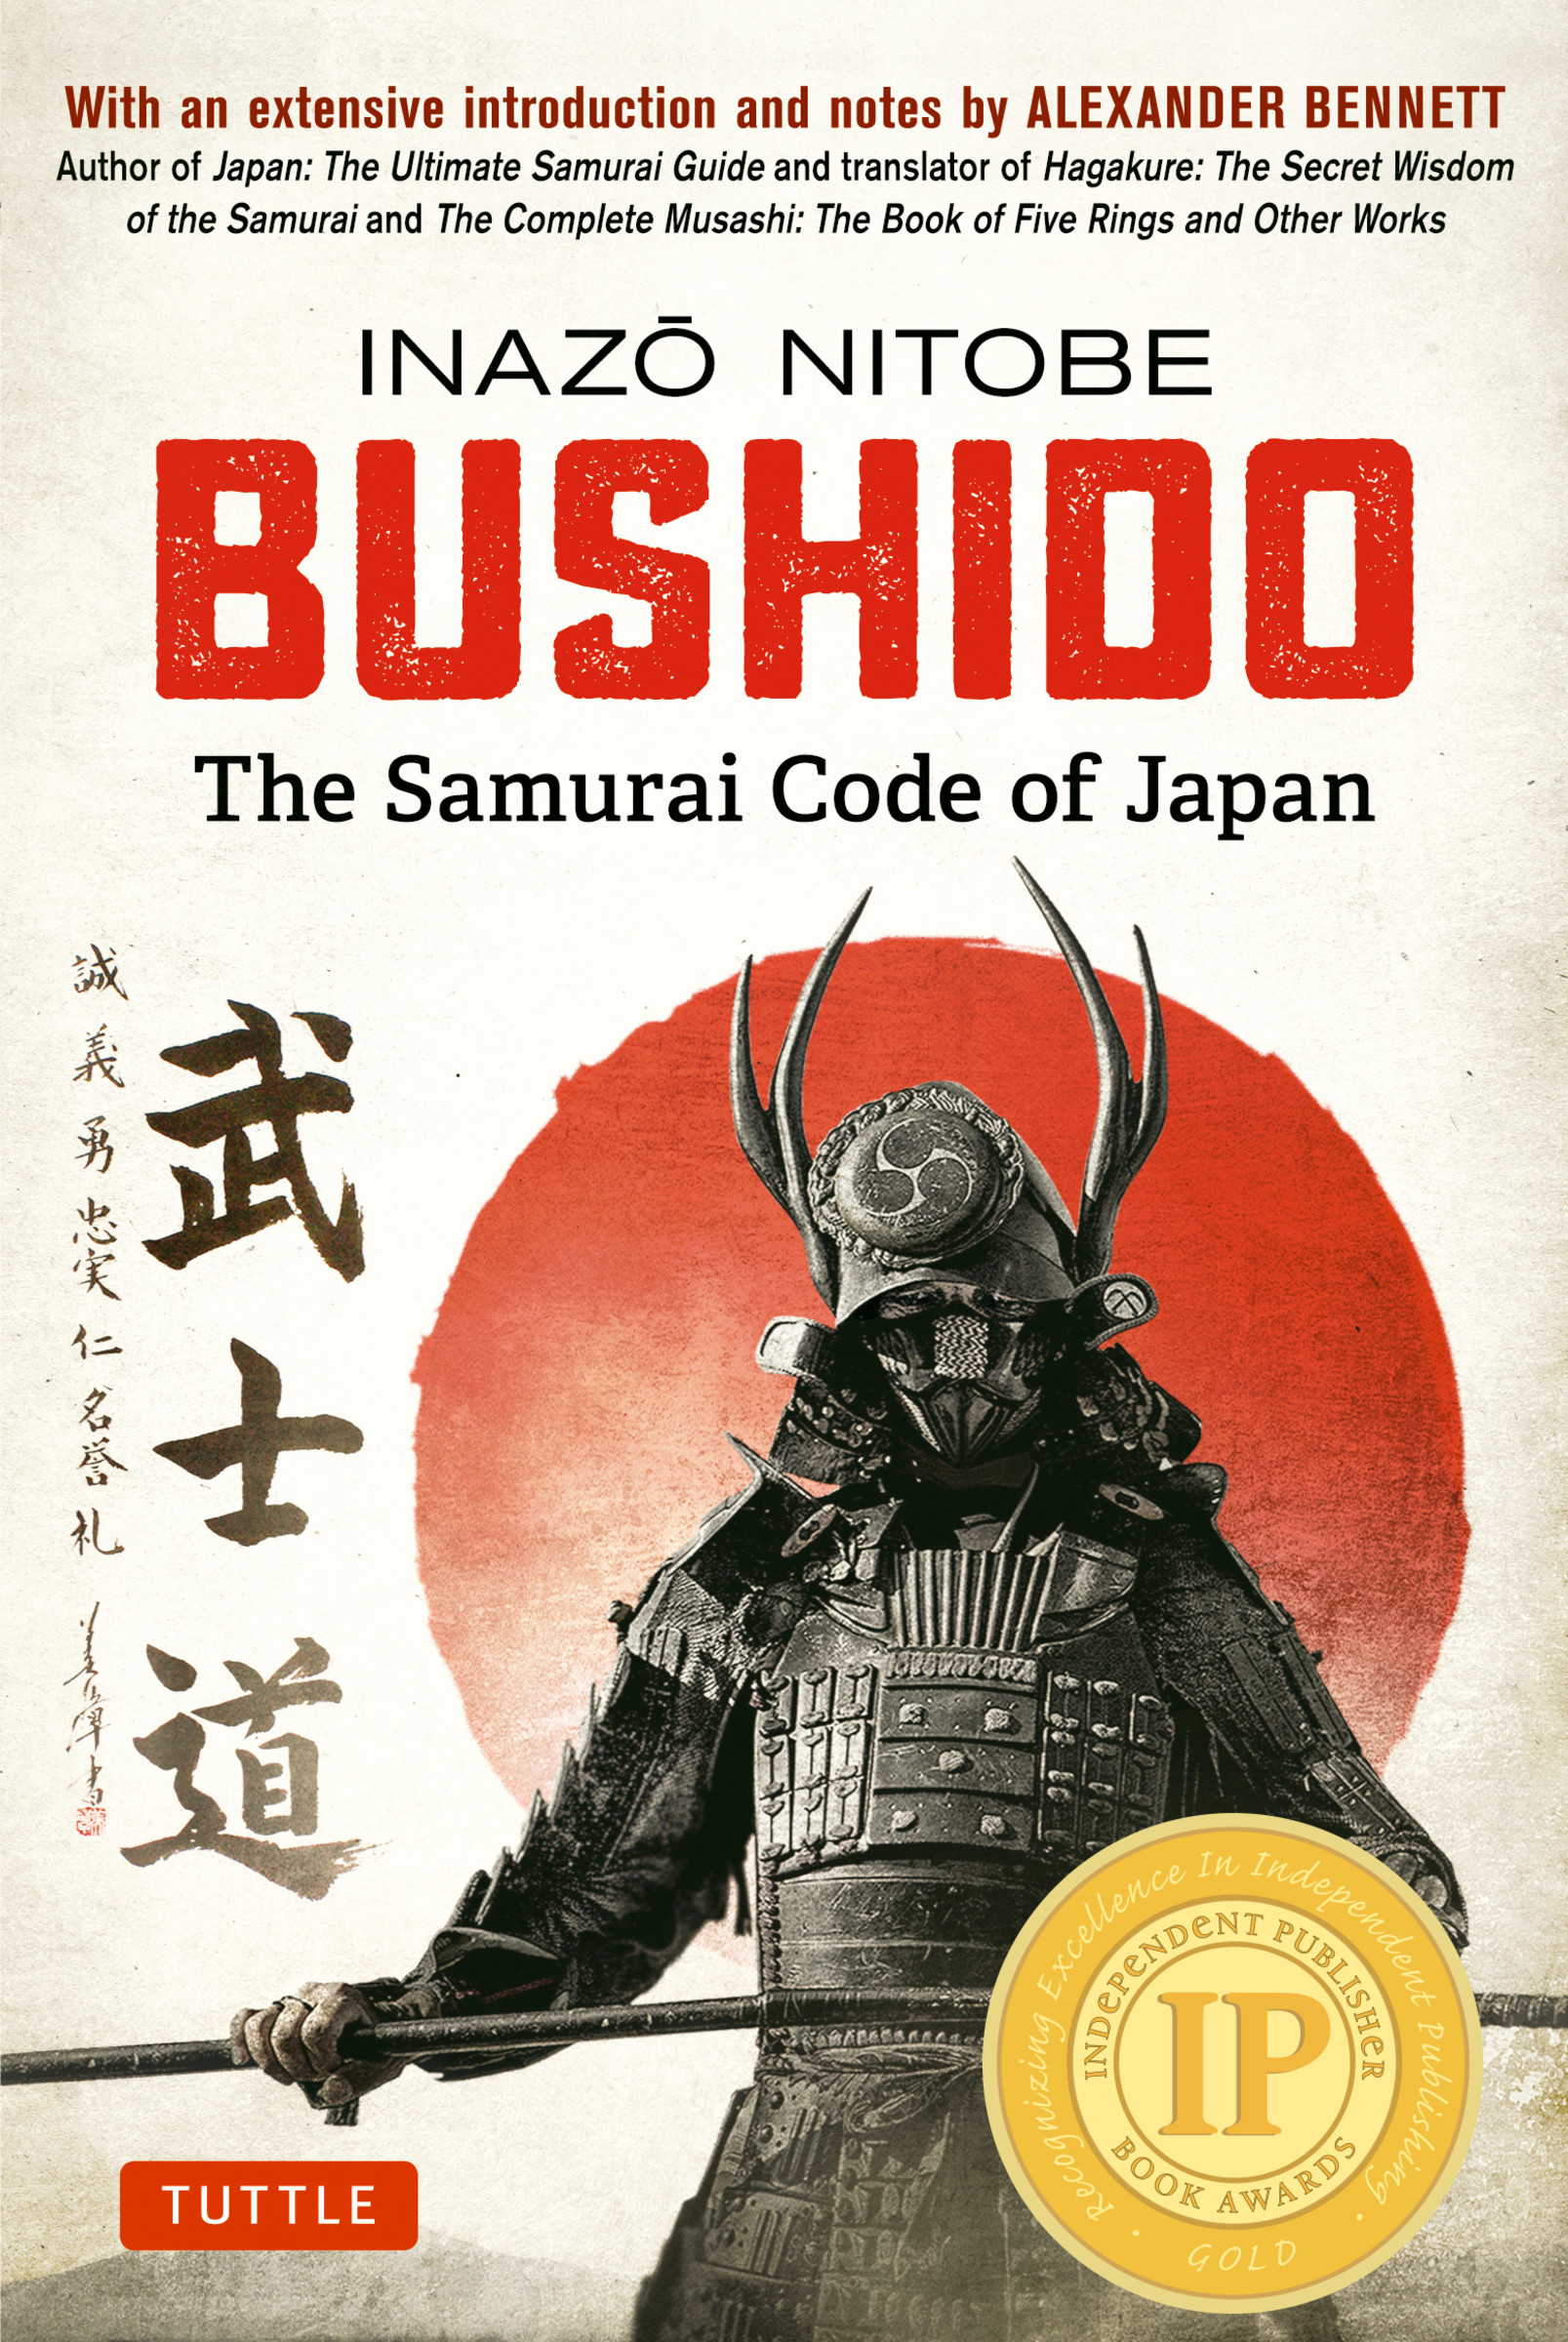 Bushido: The Samurai Code of Japan : With an Extensive Introduction and Notes by Alexander Bennett | Nitobe, Inazo